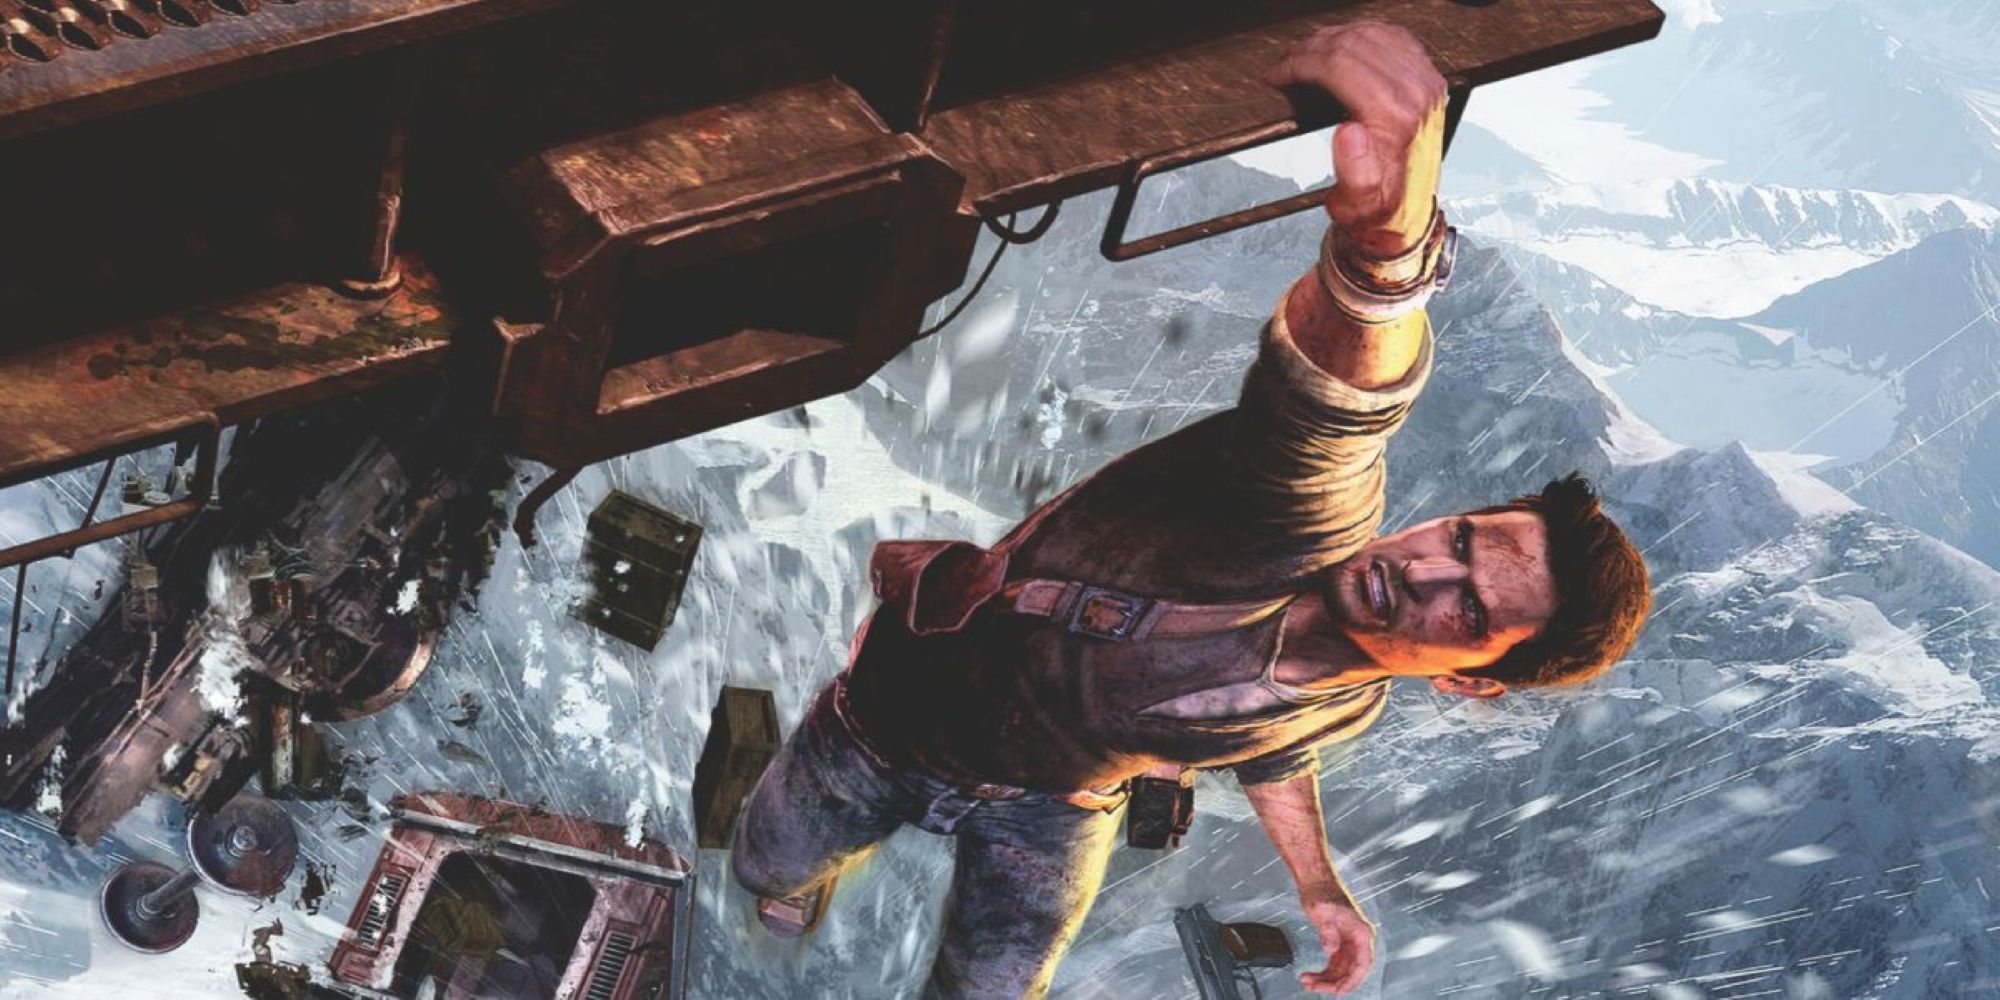 Nathan Drake from the Uncharted Franchise hangs precariously from a ledge.